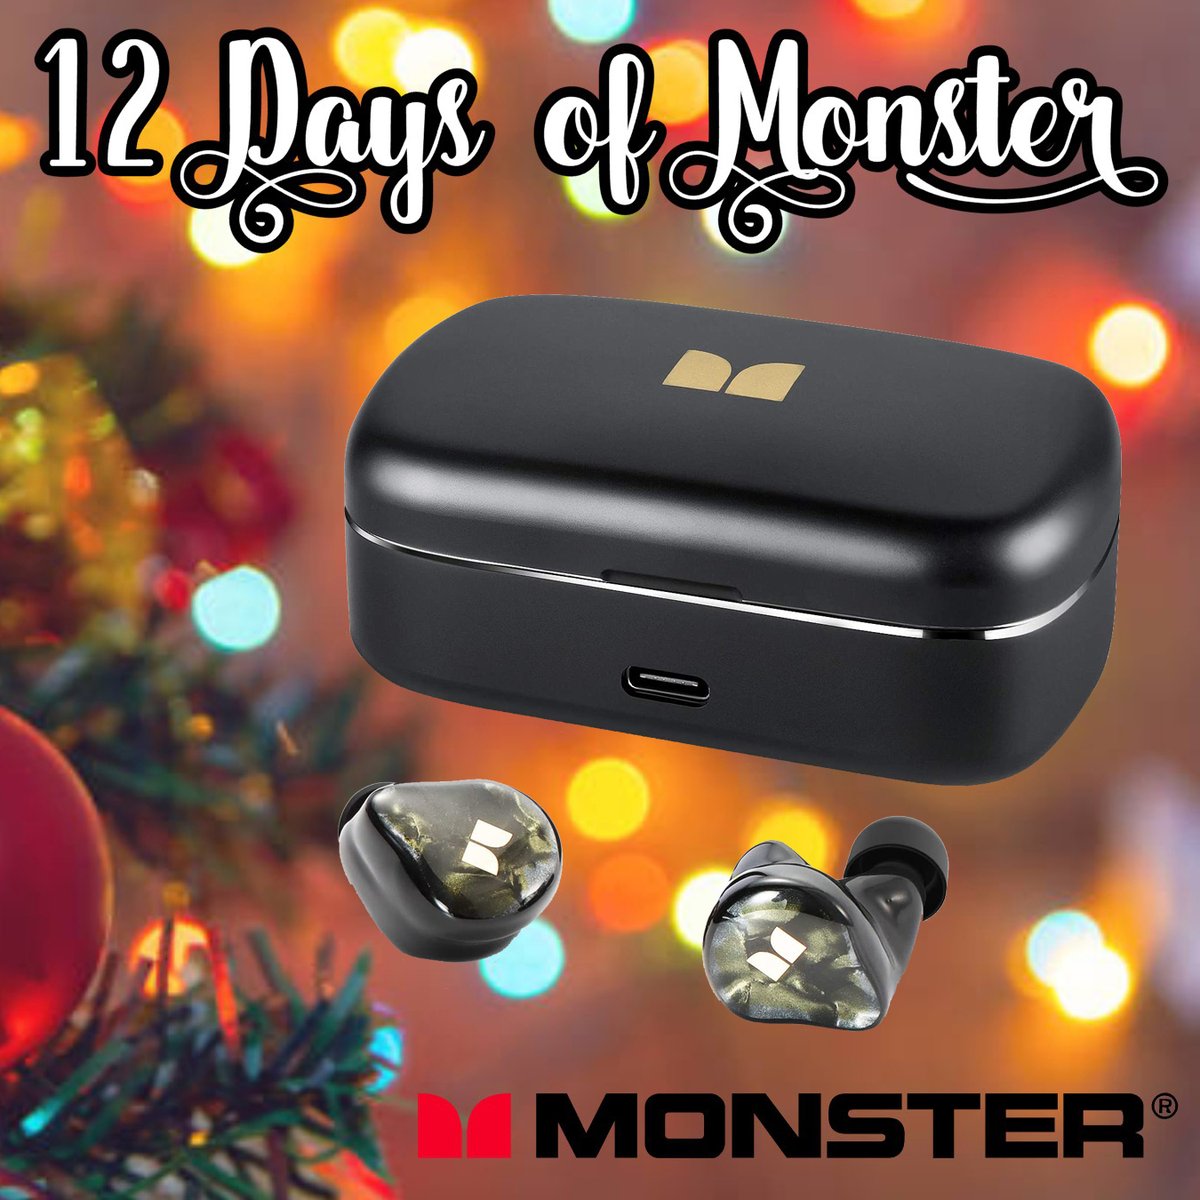 #GiveawayAlert Go to the @MonsterProducts #IG page for details on how to enter the '12 Days of Monster' #HolidayGiveaway instagram.com/monsterproducts #Giveaways #Giveaway #GiveawayEntry #monsterproducts #monsterheadphones #monsterspeaker #monstercable